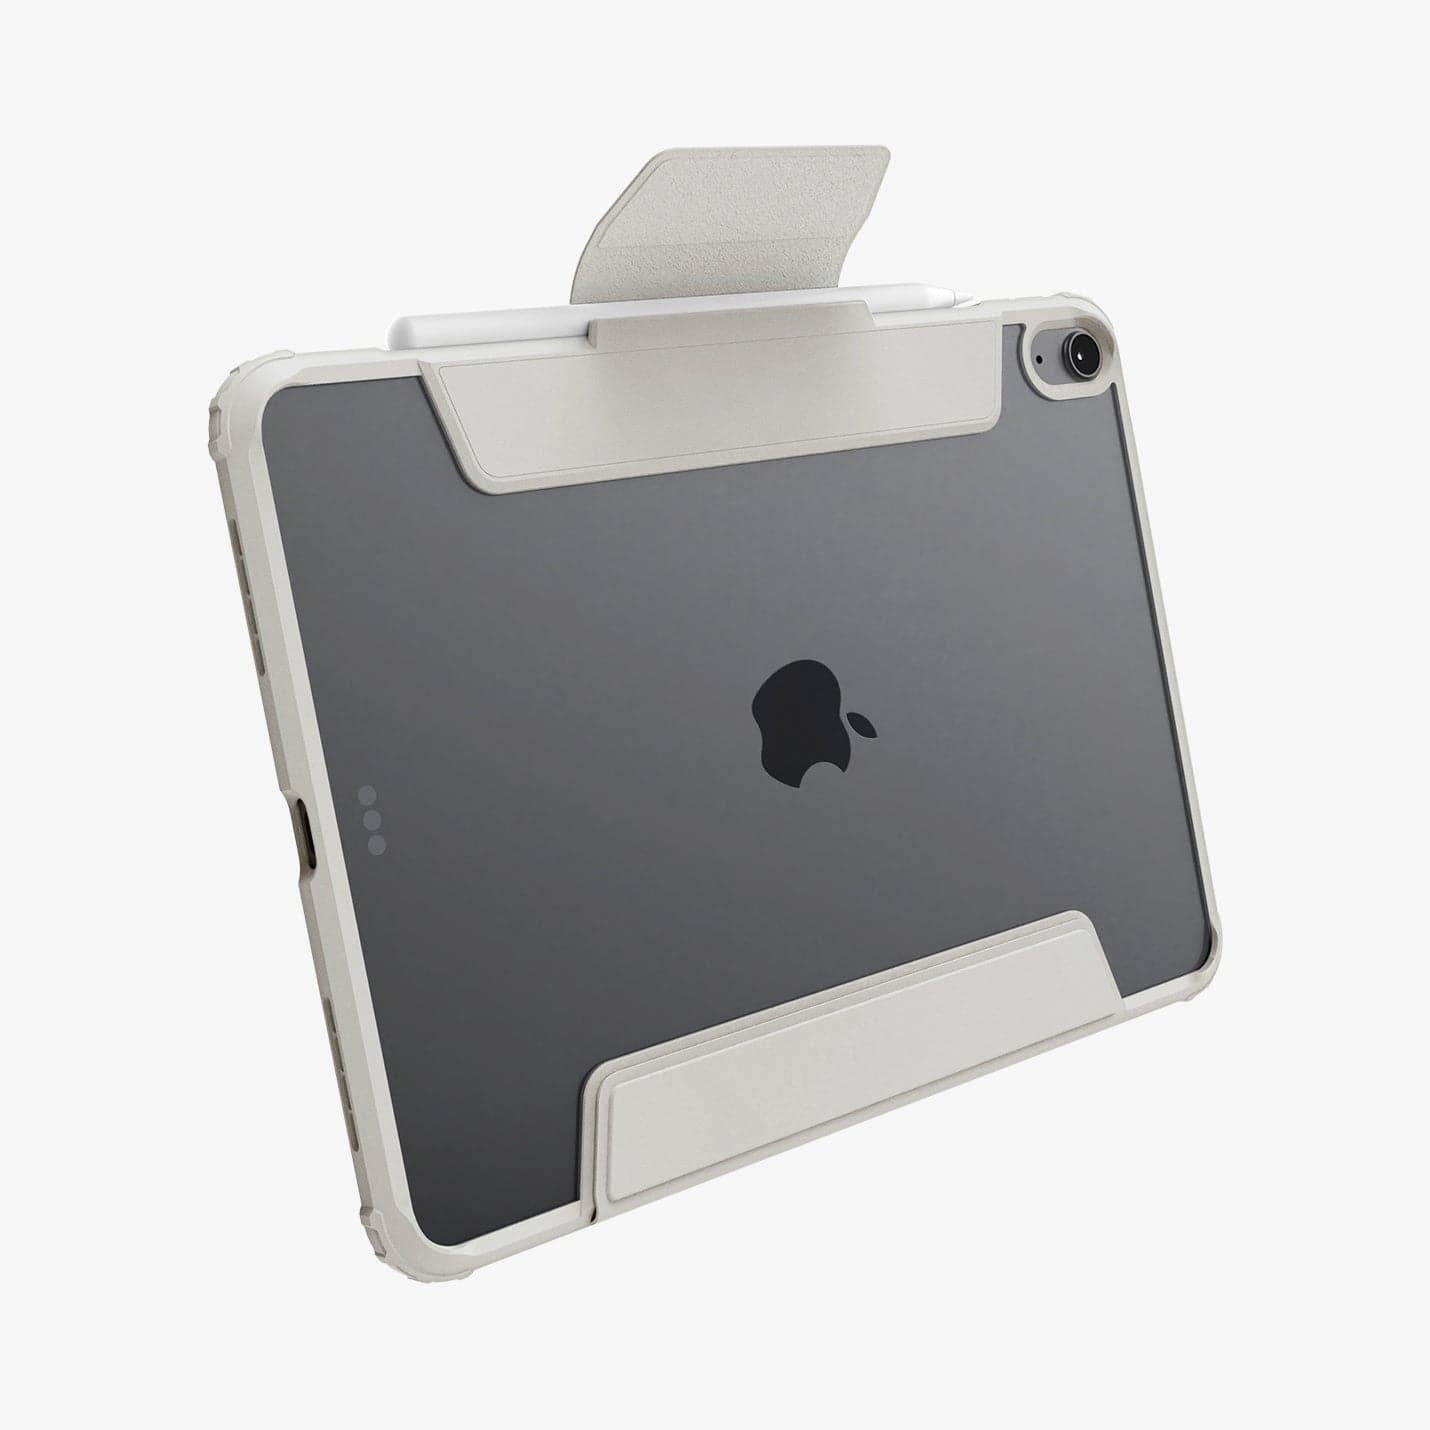 ACS06074 - iPad Air 10.9" Case Air Skin Pro in gray showing the back and partial bottom with cover flap open